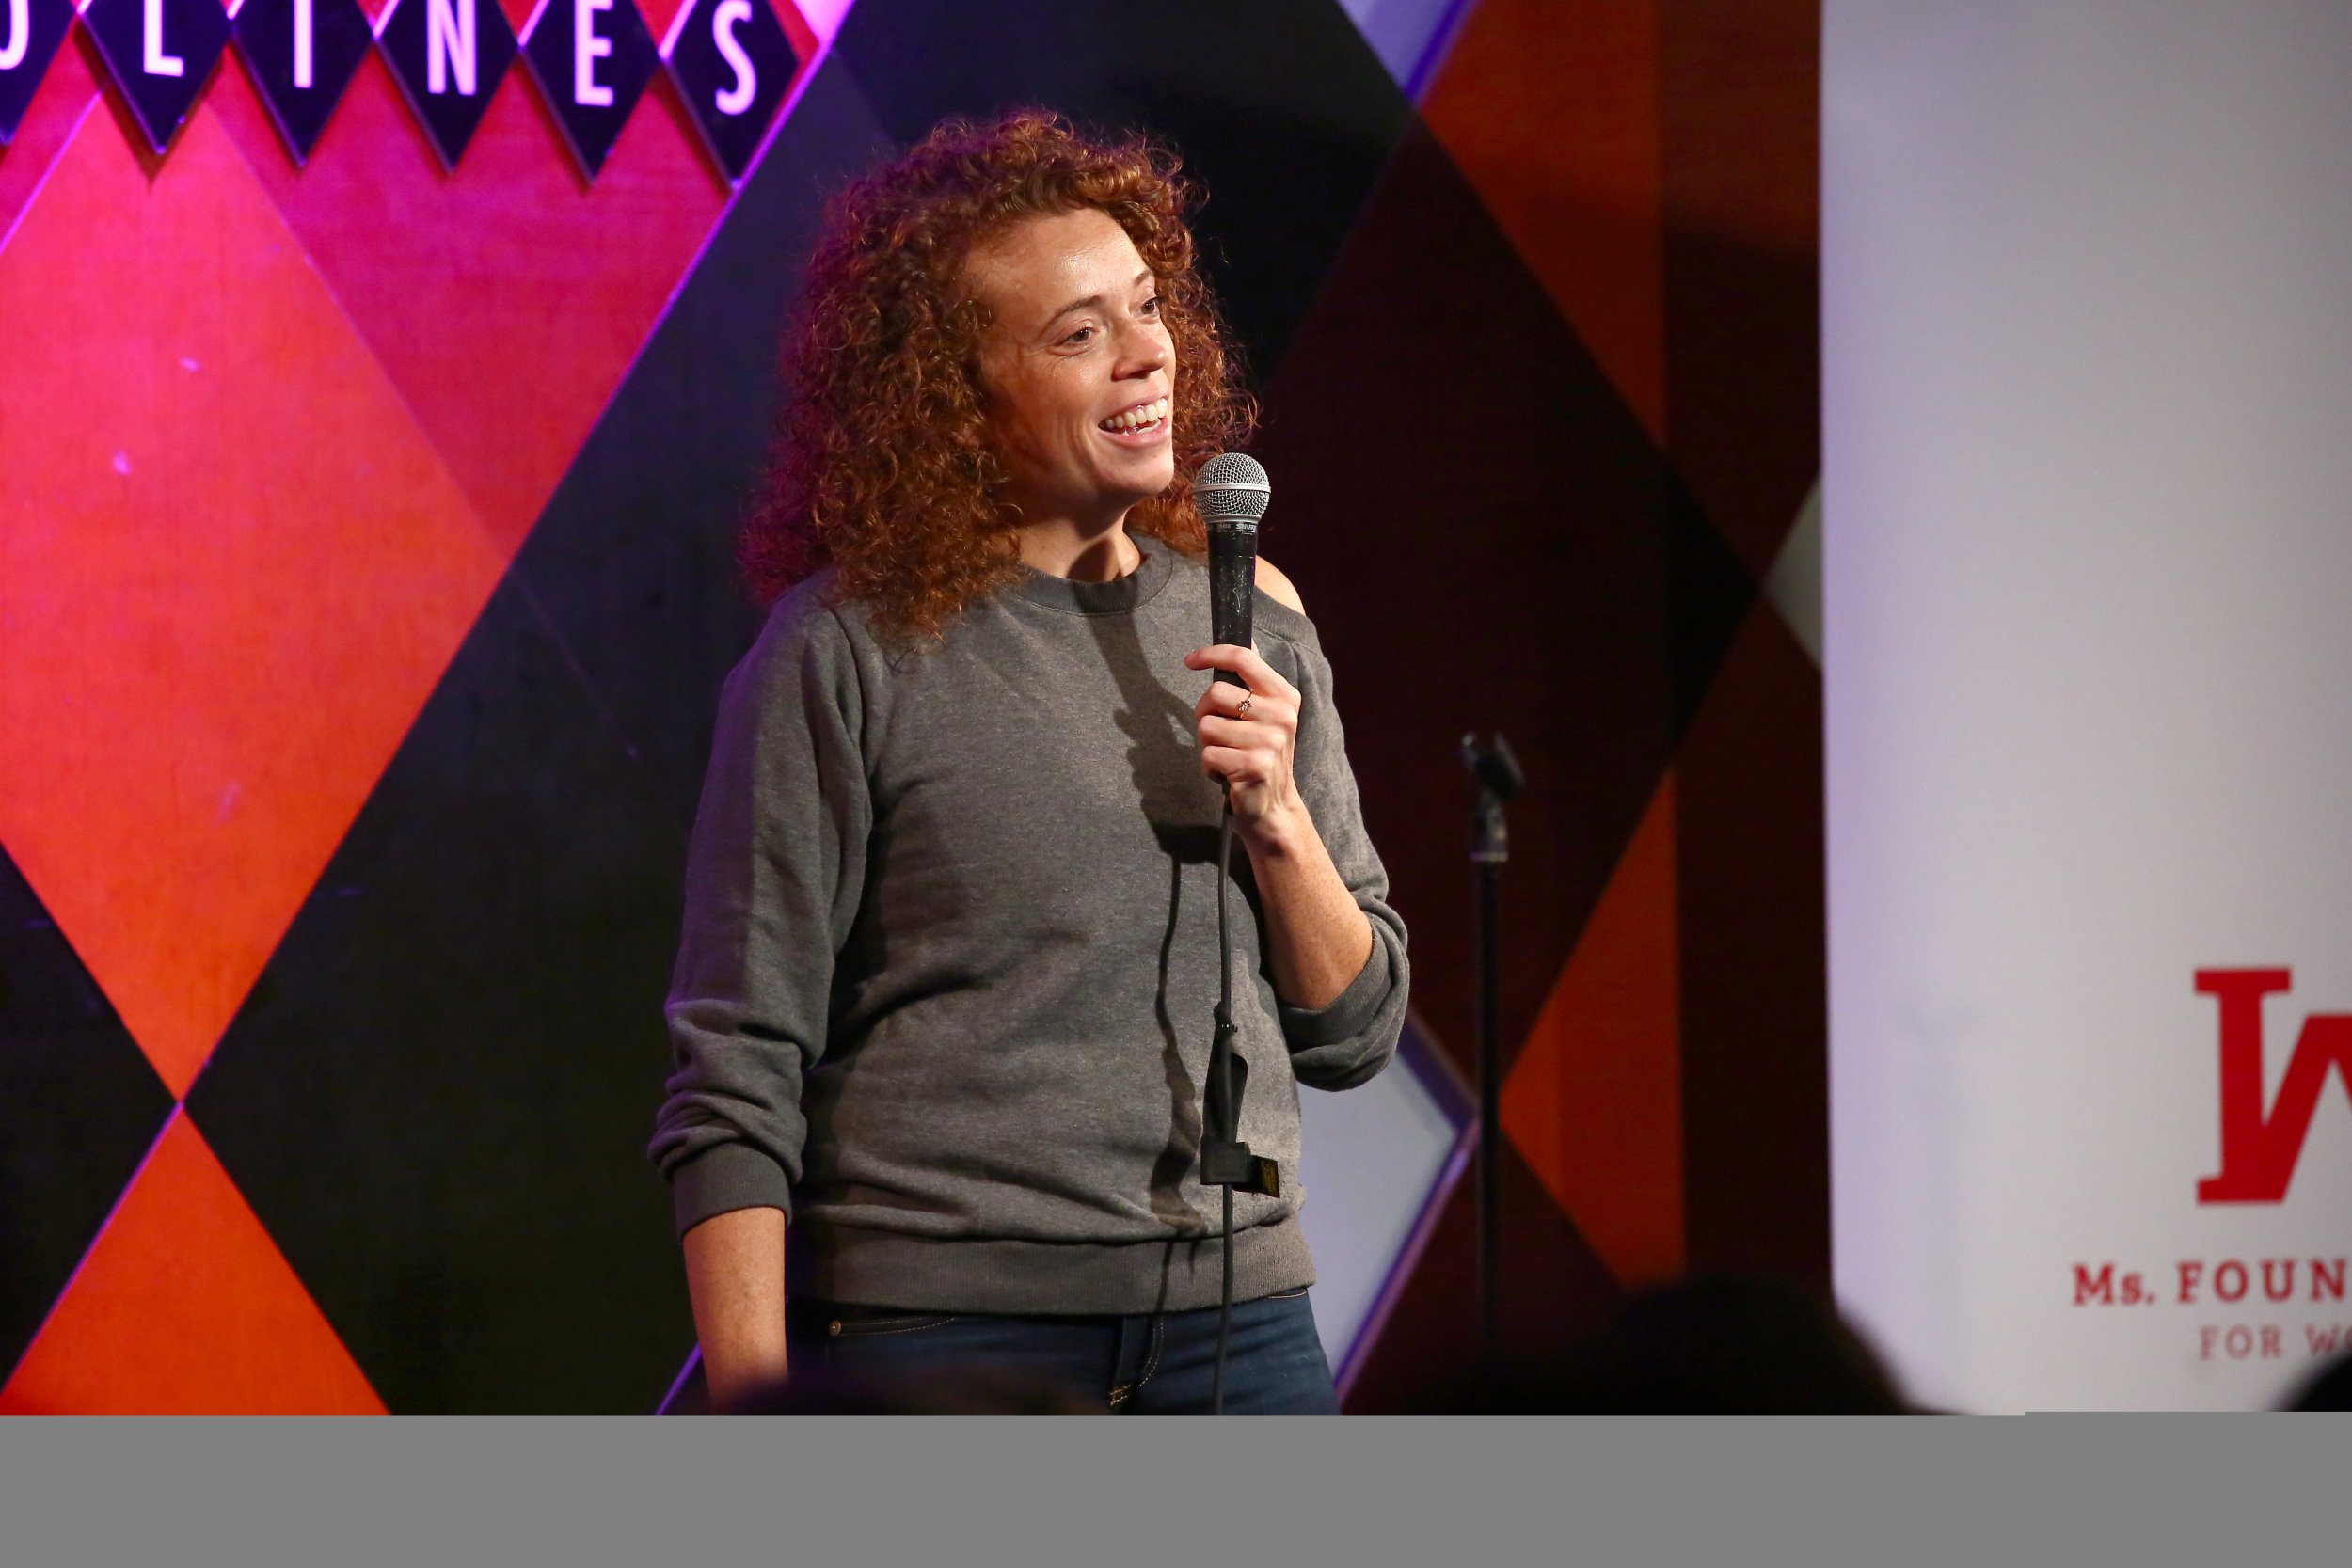 michelle wolf ugly